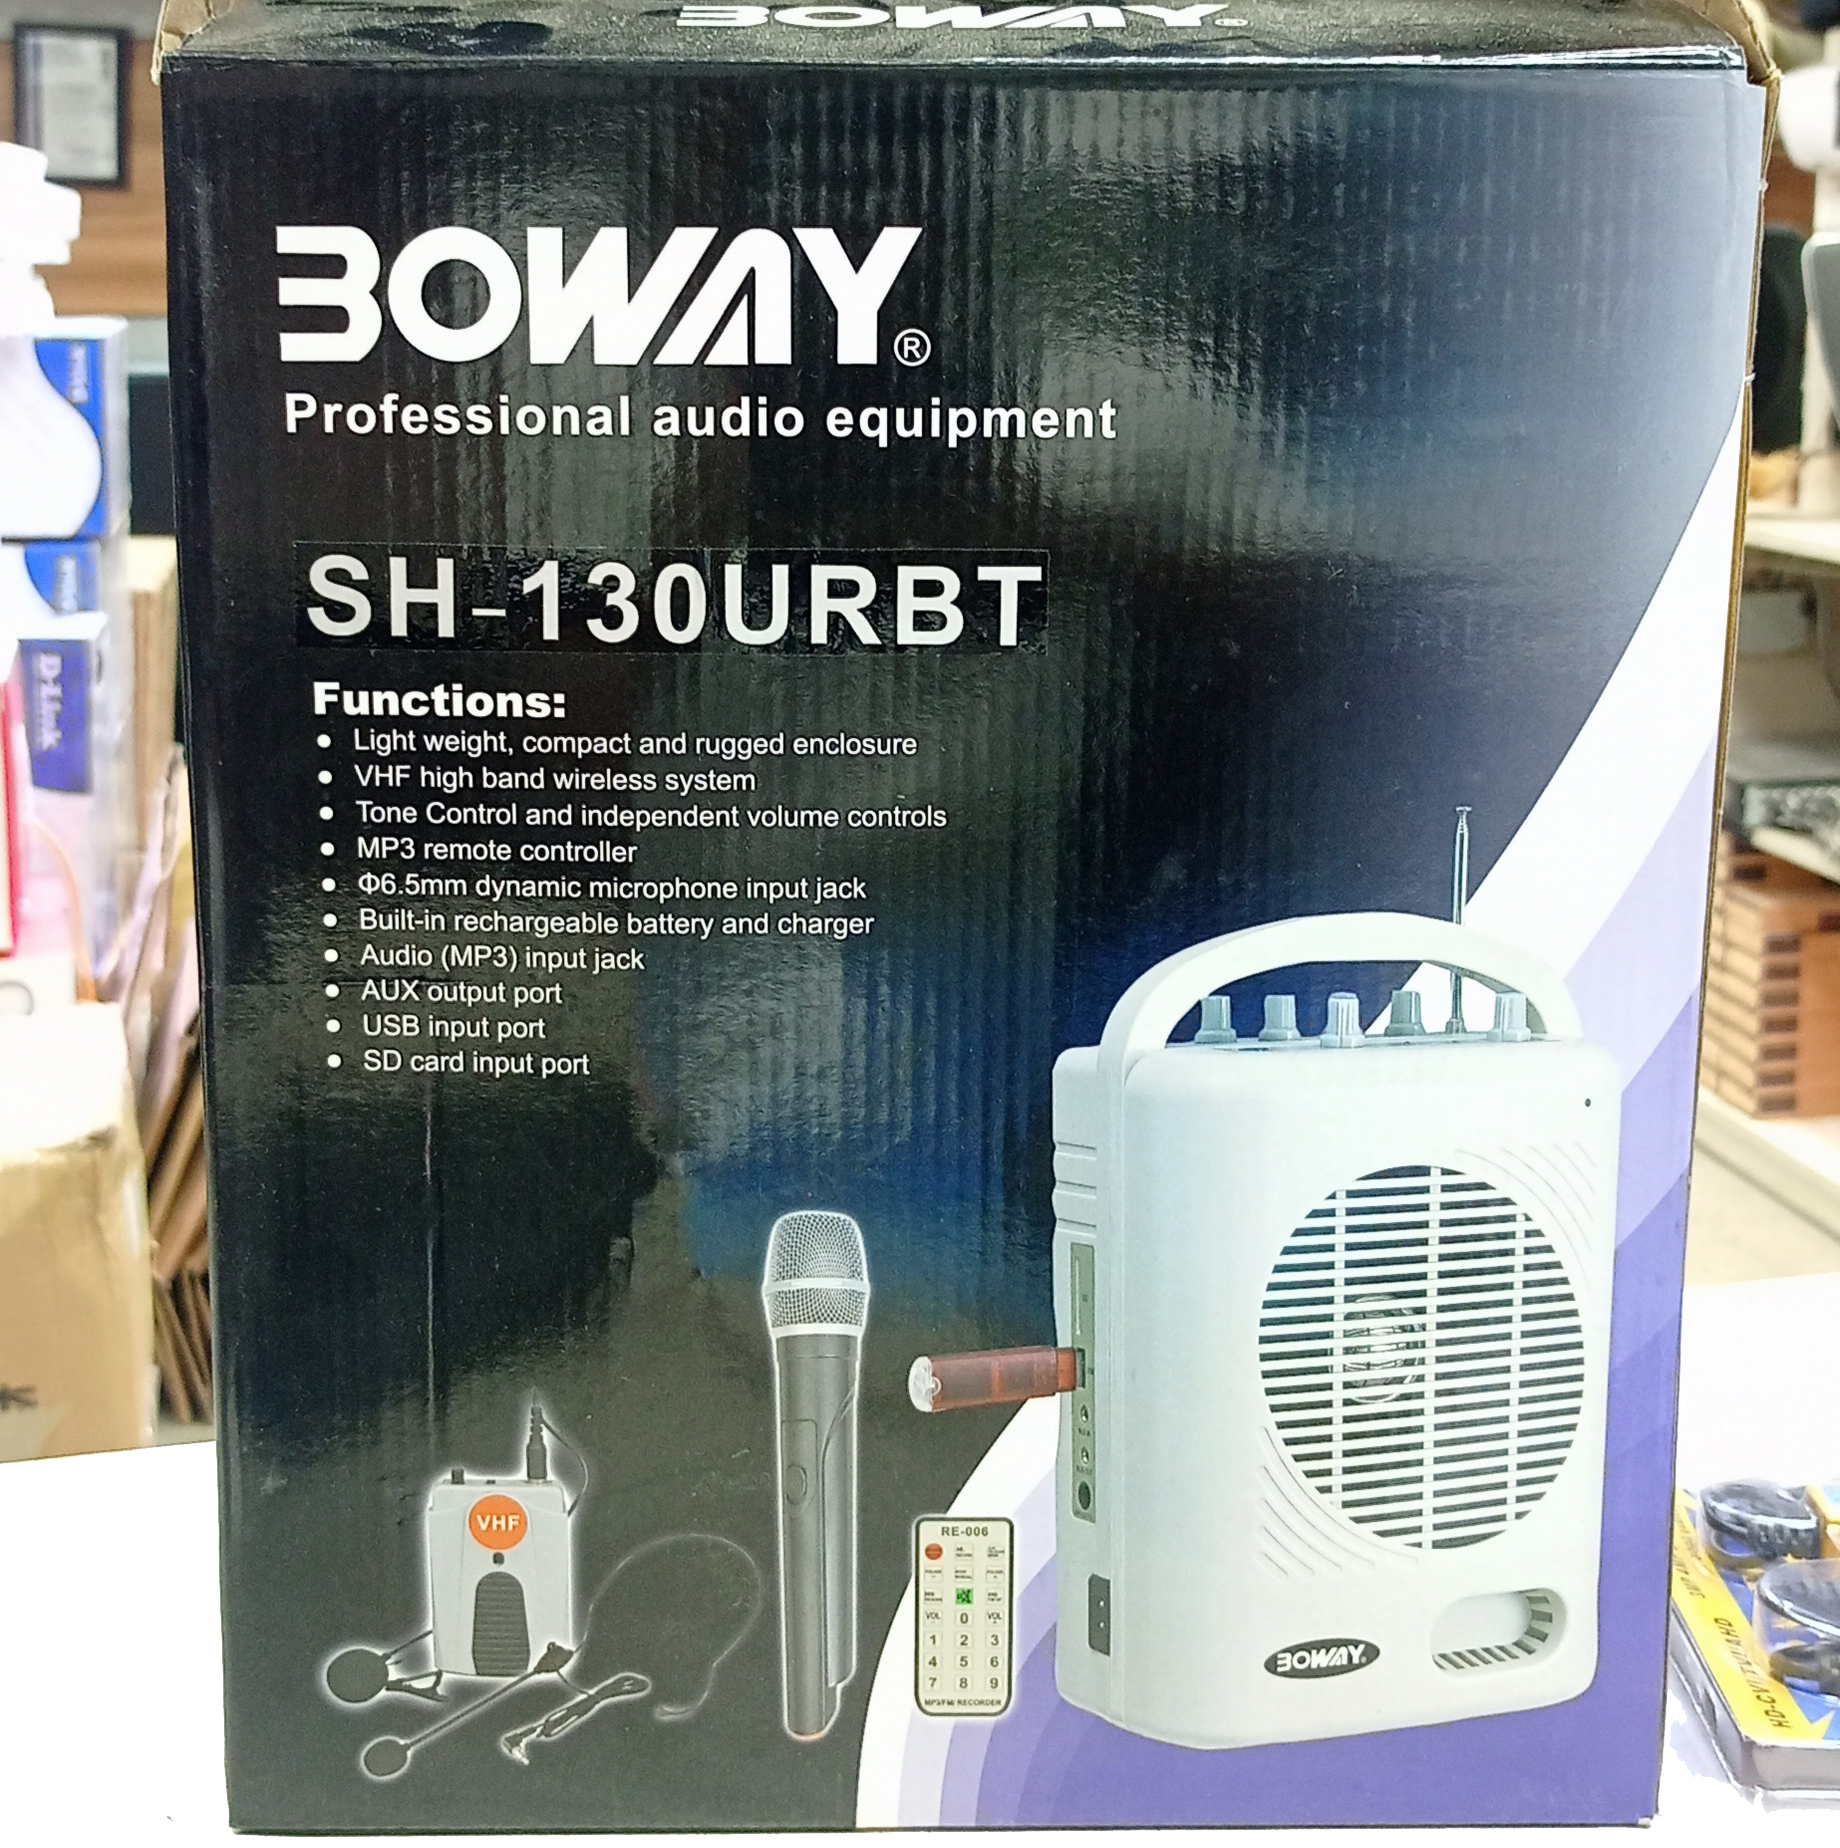 BOWAY SH-130URBT Mini Rechargeable Wireless Amplifier Price in Bangladesh